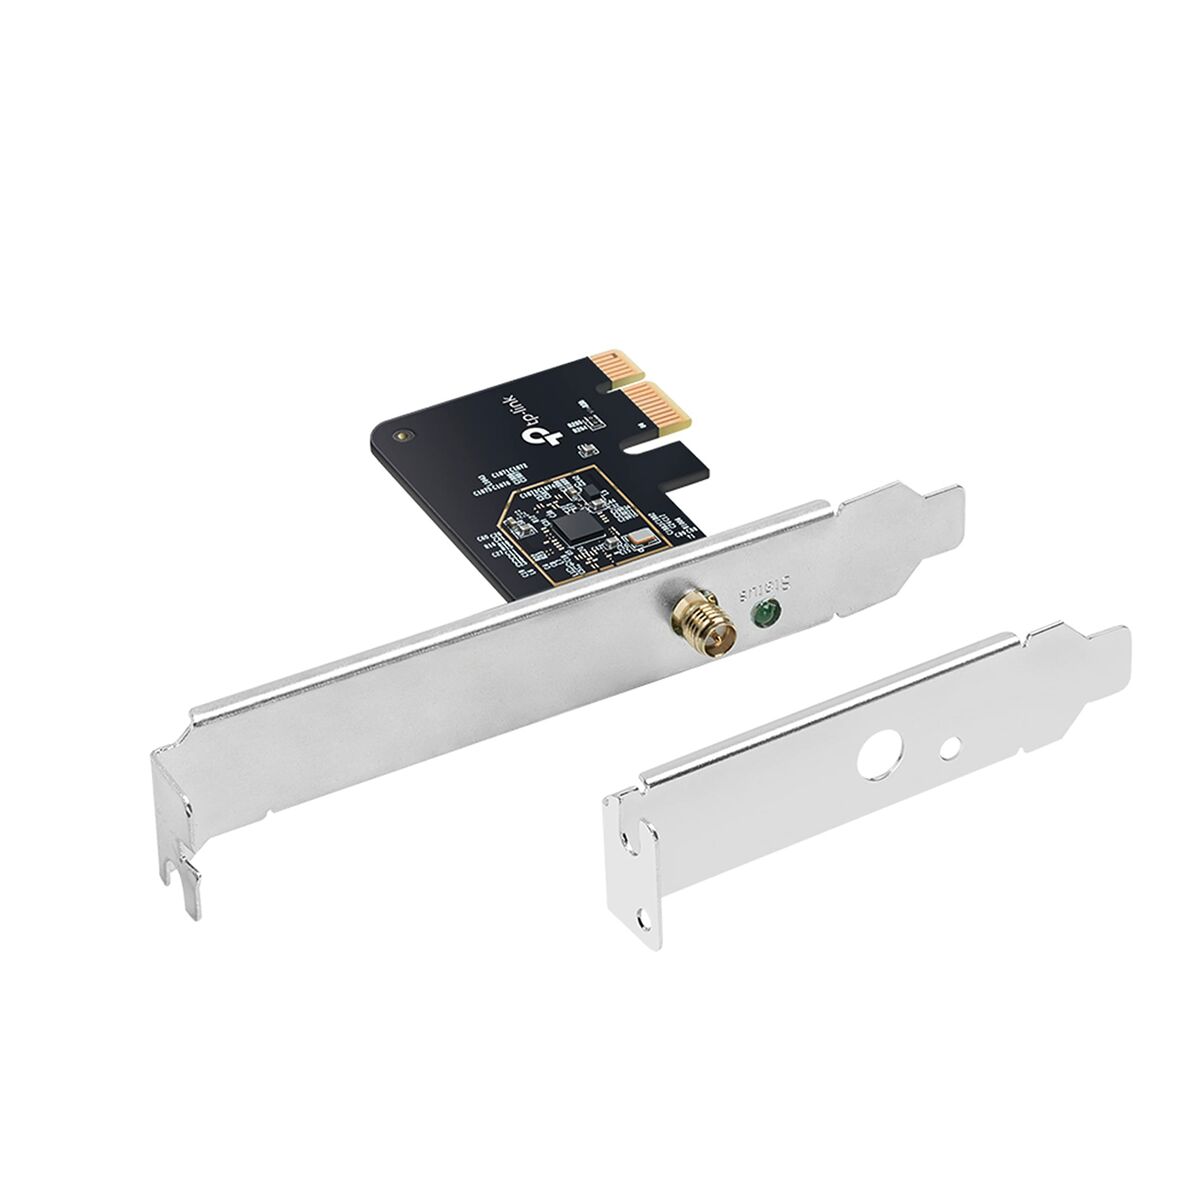 Network Card TP-Link Archer T2E, TP-Link, Computing, Components, network-card-tp-link-archer-t2e, Brand_TP-Link, category-reference-2609, category-reference-2803, category-reference-2811, category-reference-t-19685, category-reference-t-19912, category-reference-t-21360, computers / components, Condition_NEW, Price_20 - 50, Teleworking, RiotNook